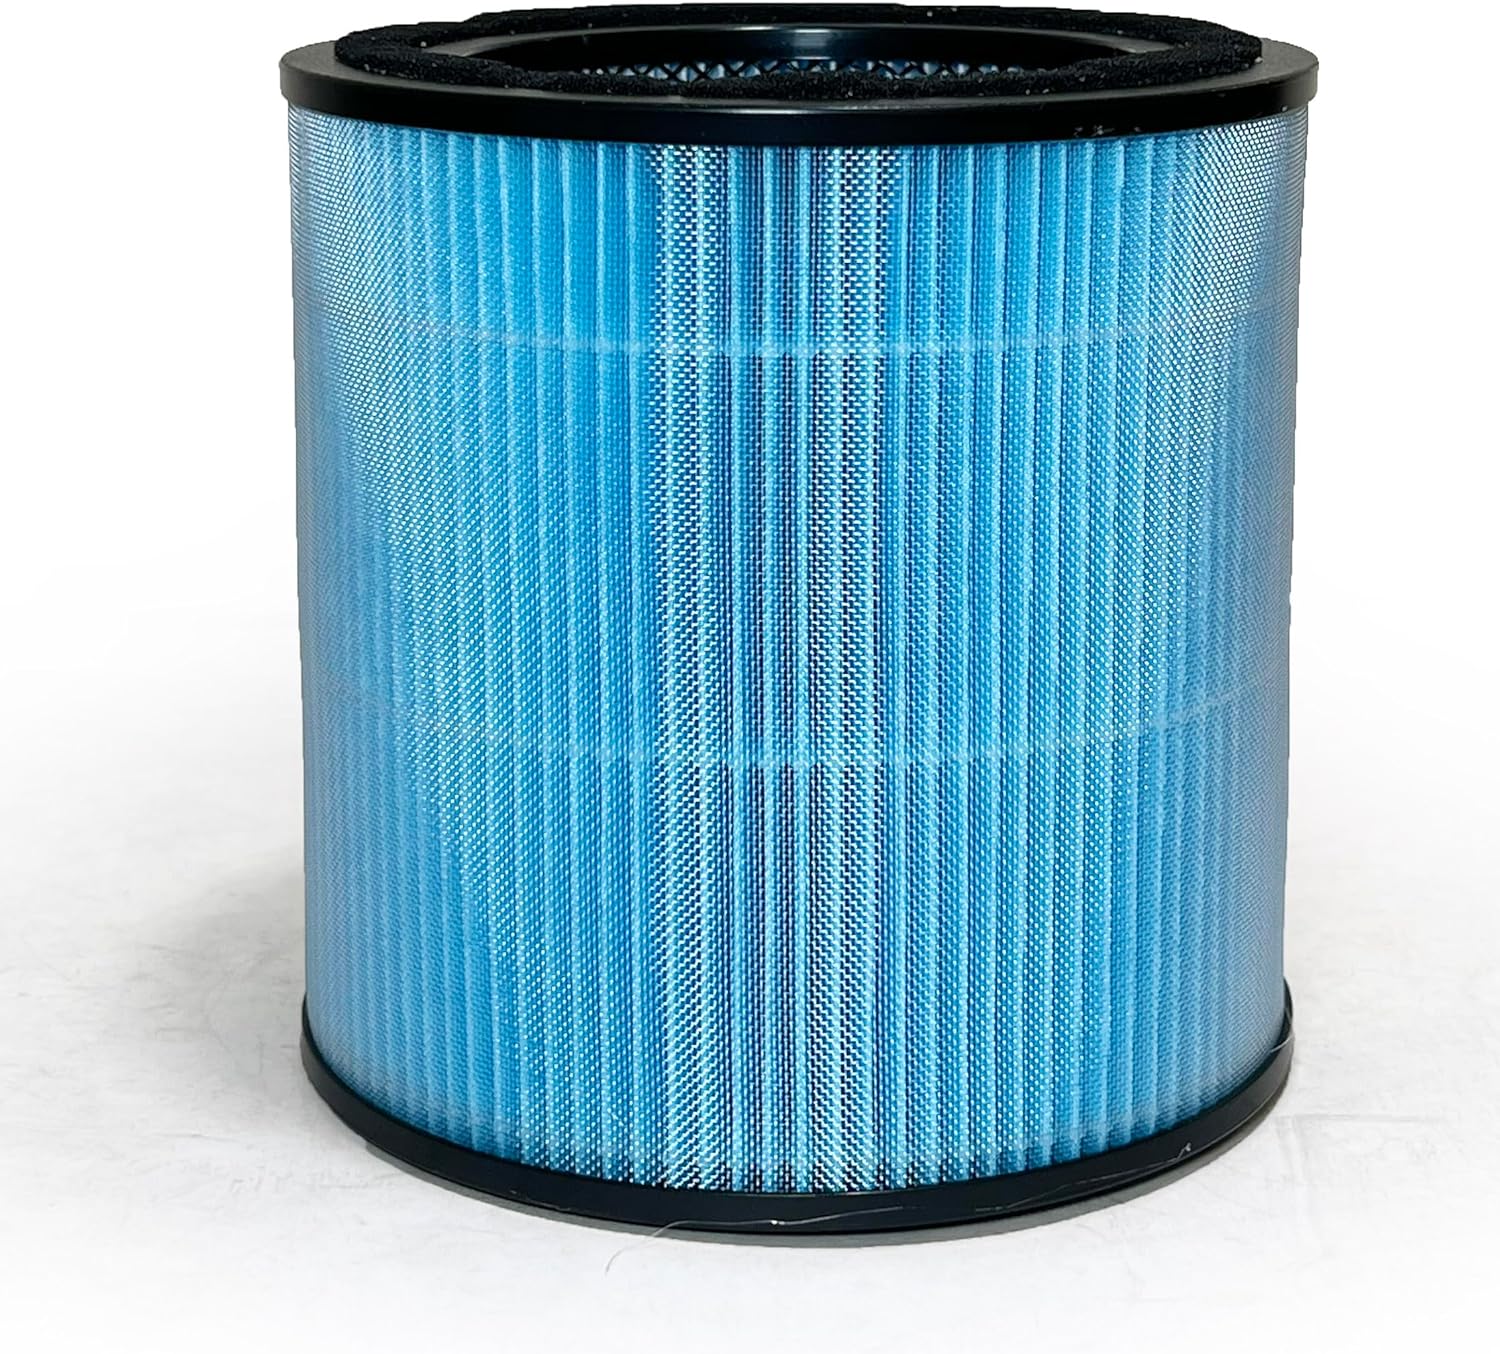 Nispira AP0601 2-in-1 True HEPA Filter Replacement for AirTok Air Purifier AP0601-RF | Remove Particle Size down to 0.1 microns